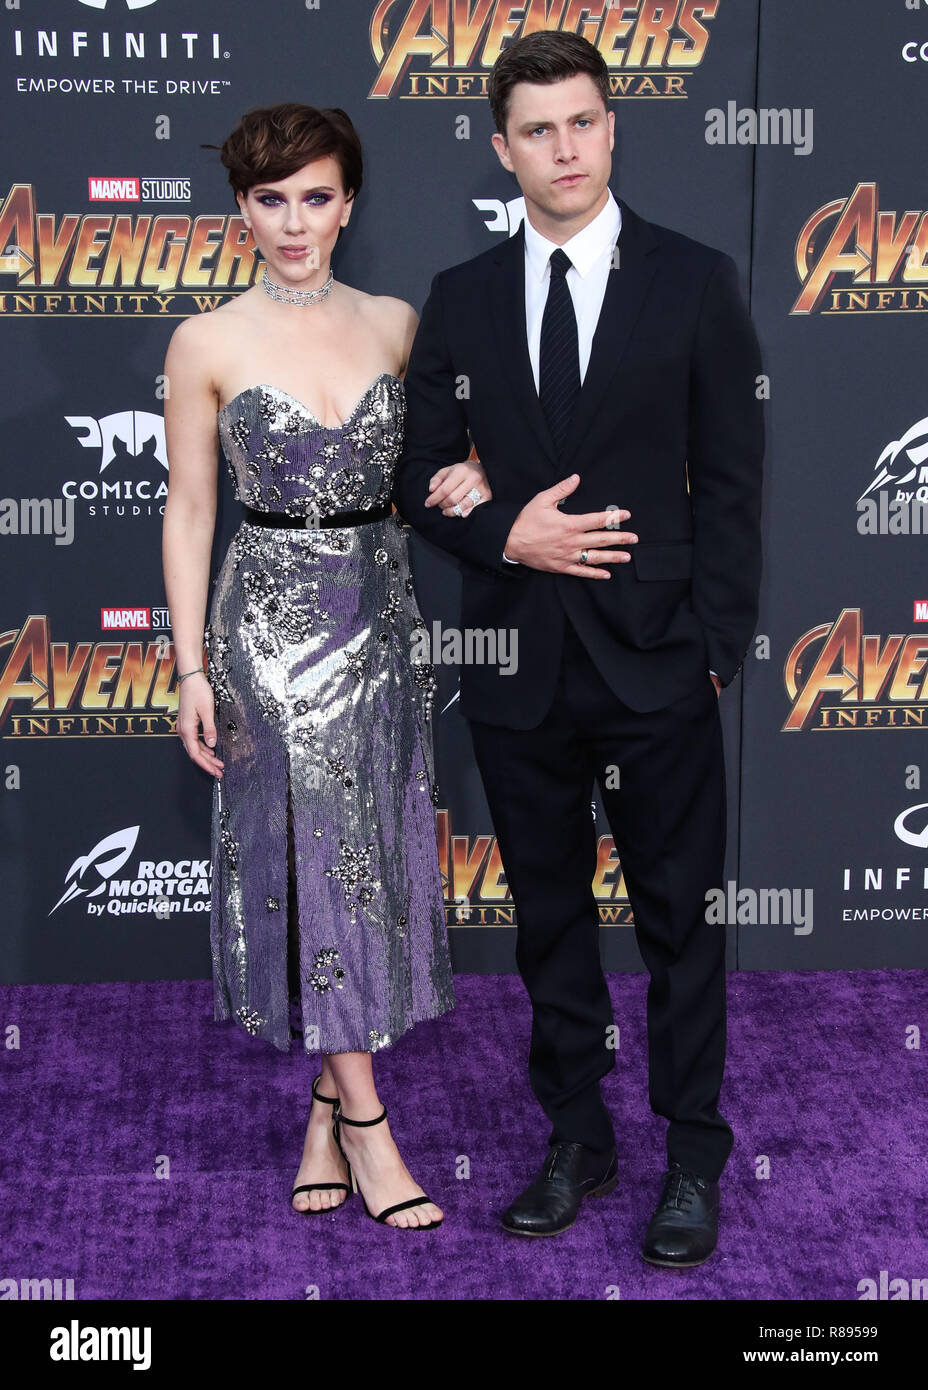 HOLLYWOOD, LOS ANGELES, CA, USA - APRIL 23: Scarlett Johansson, Colin Jost at the World Premiere Of Disney And Marvel's 'Avengers: Infinity War' held at the El Capitan Theatre, Dolby Theatre and TCL Chinese Theatre IMAX on April 23, 2018 in Hollywood, Los Angeles, California, United States. (Photo by Xavier Collin/Image Press Agency) Stock Photo